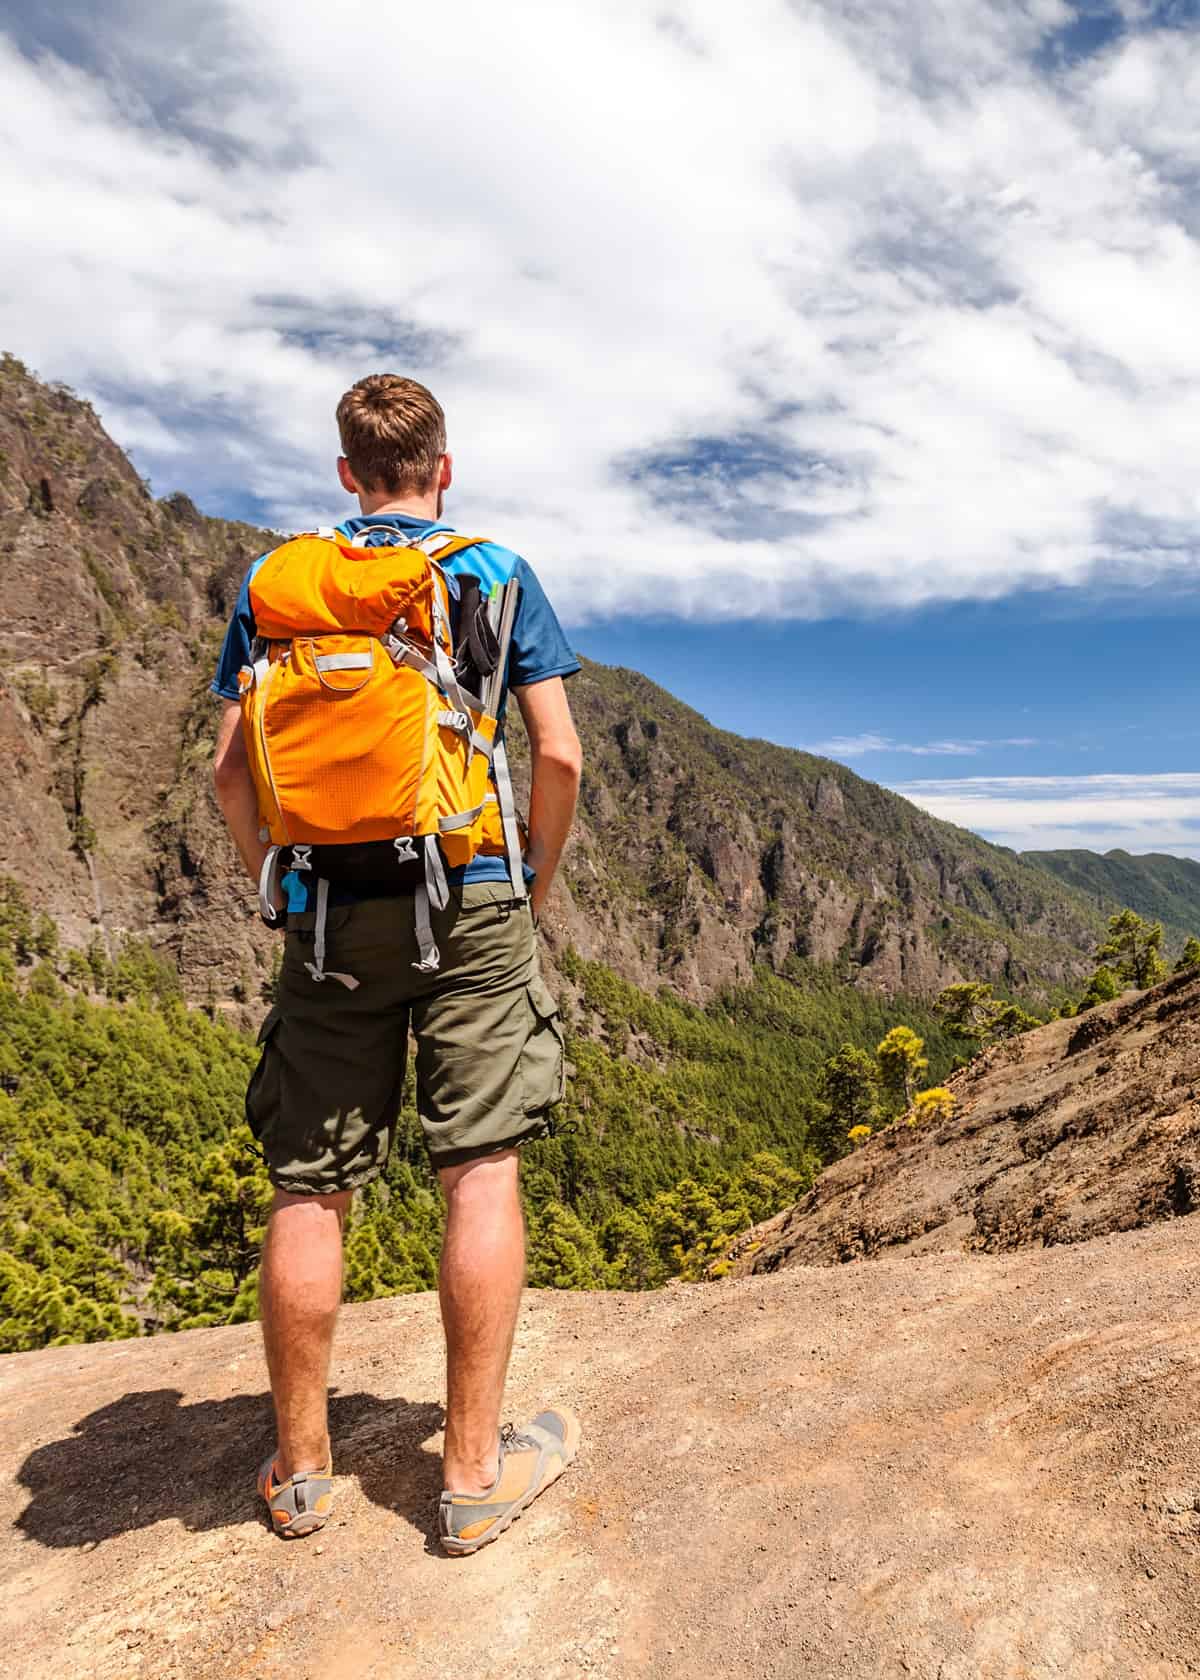 International travel insurance for hikers